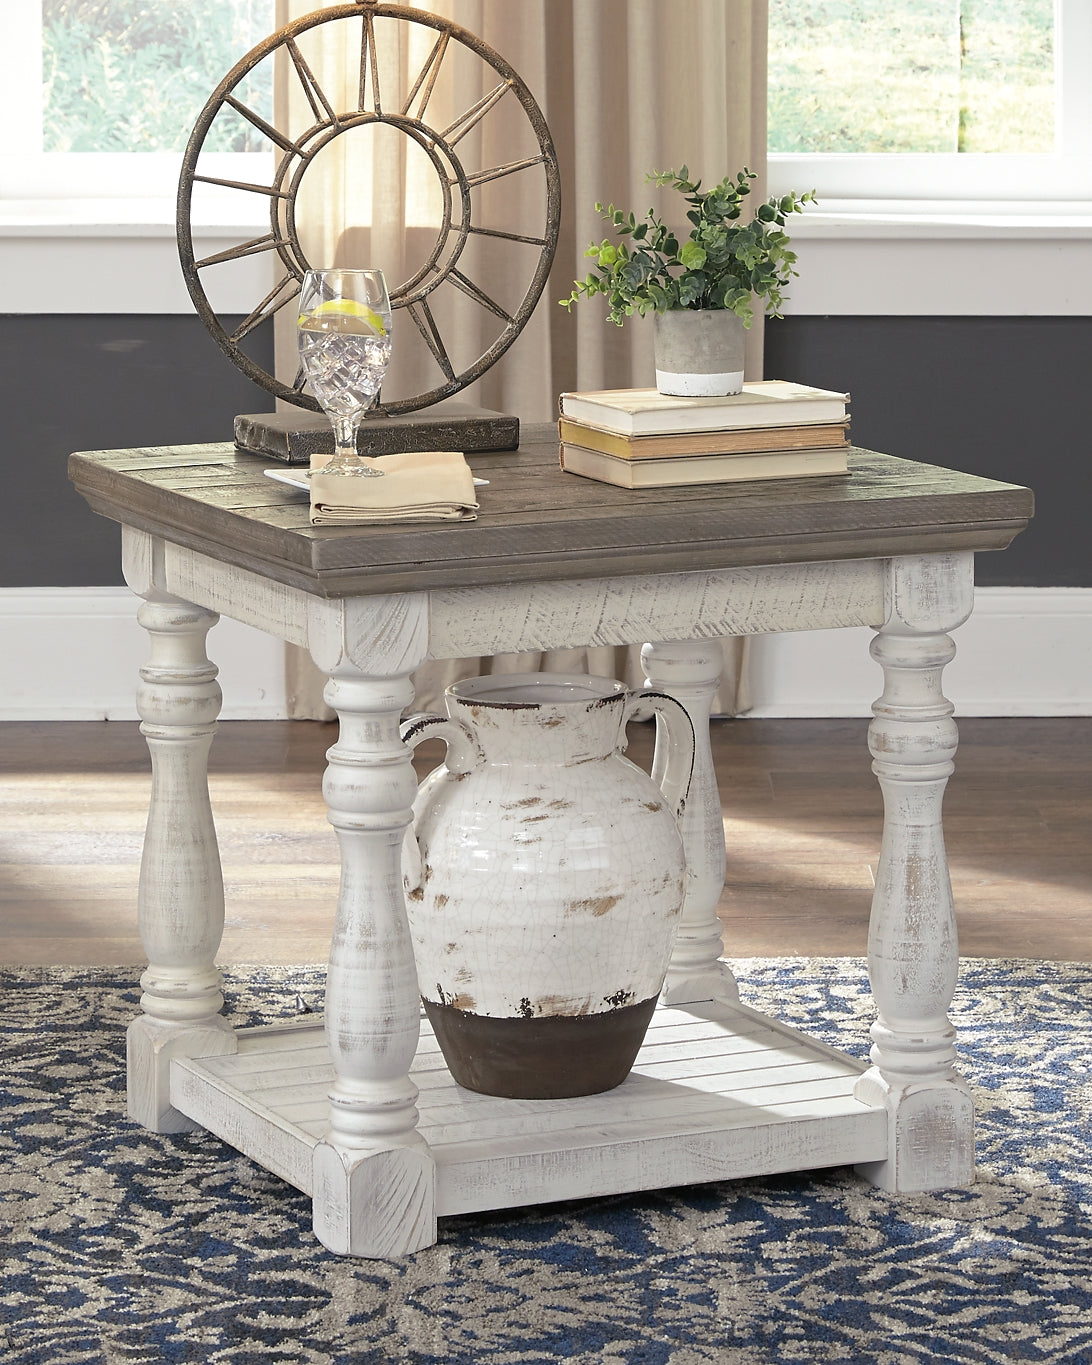 Havalance 2 End Tables at Cloud 9 Mattress & Furniture furniture, home furnishing, home decor